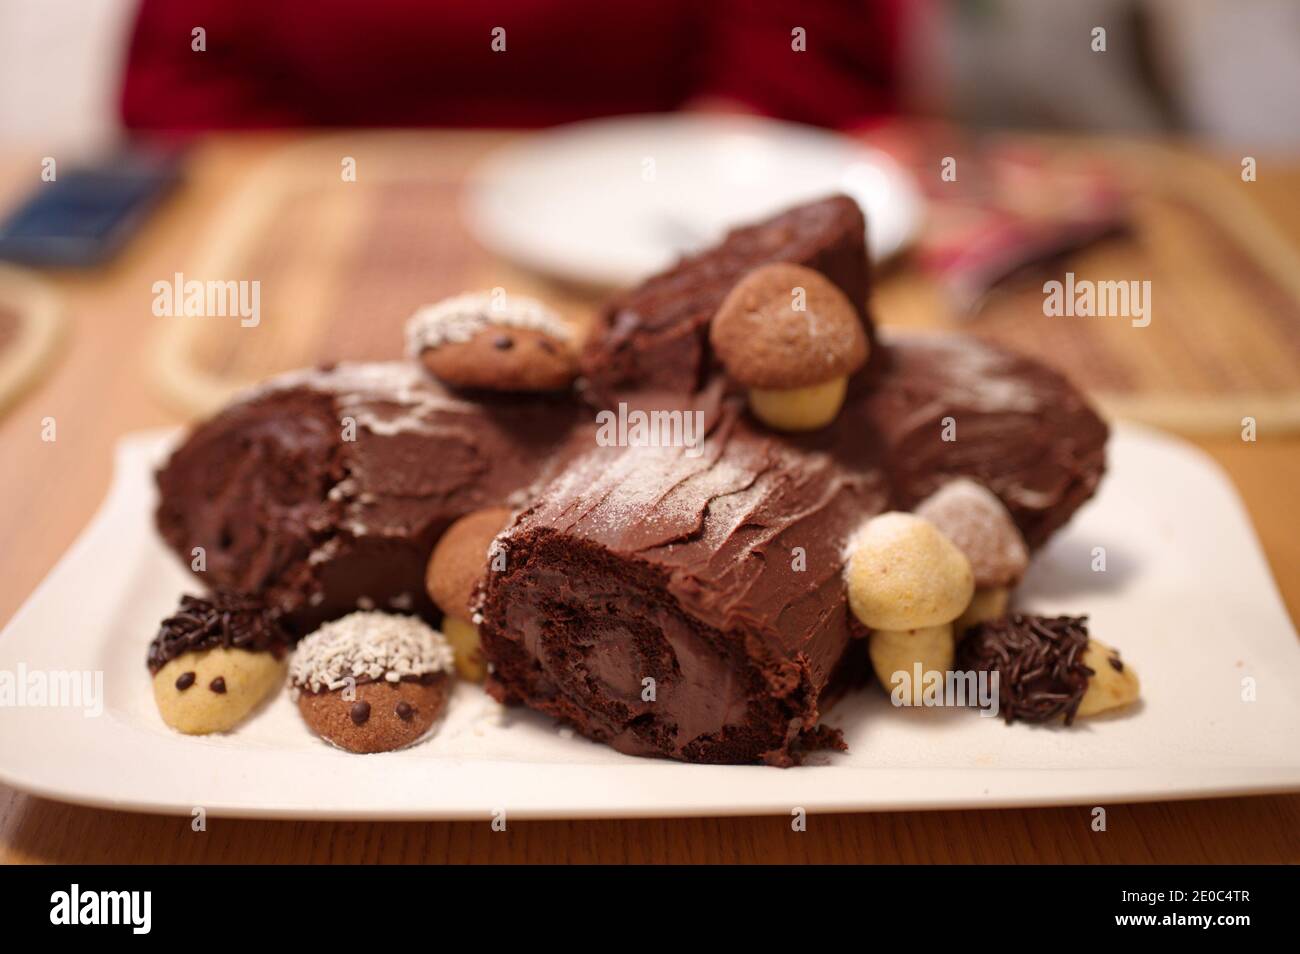 Decorated Christmas chocolate cake with cookies on white plate Stock Photo